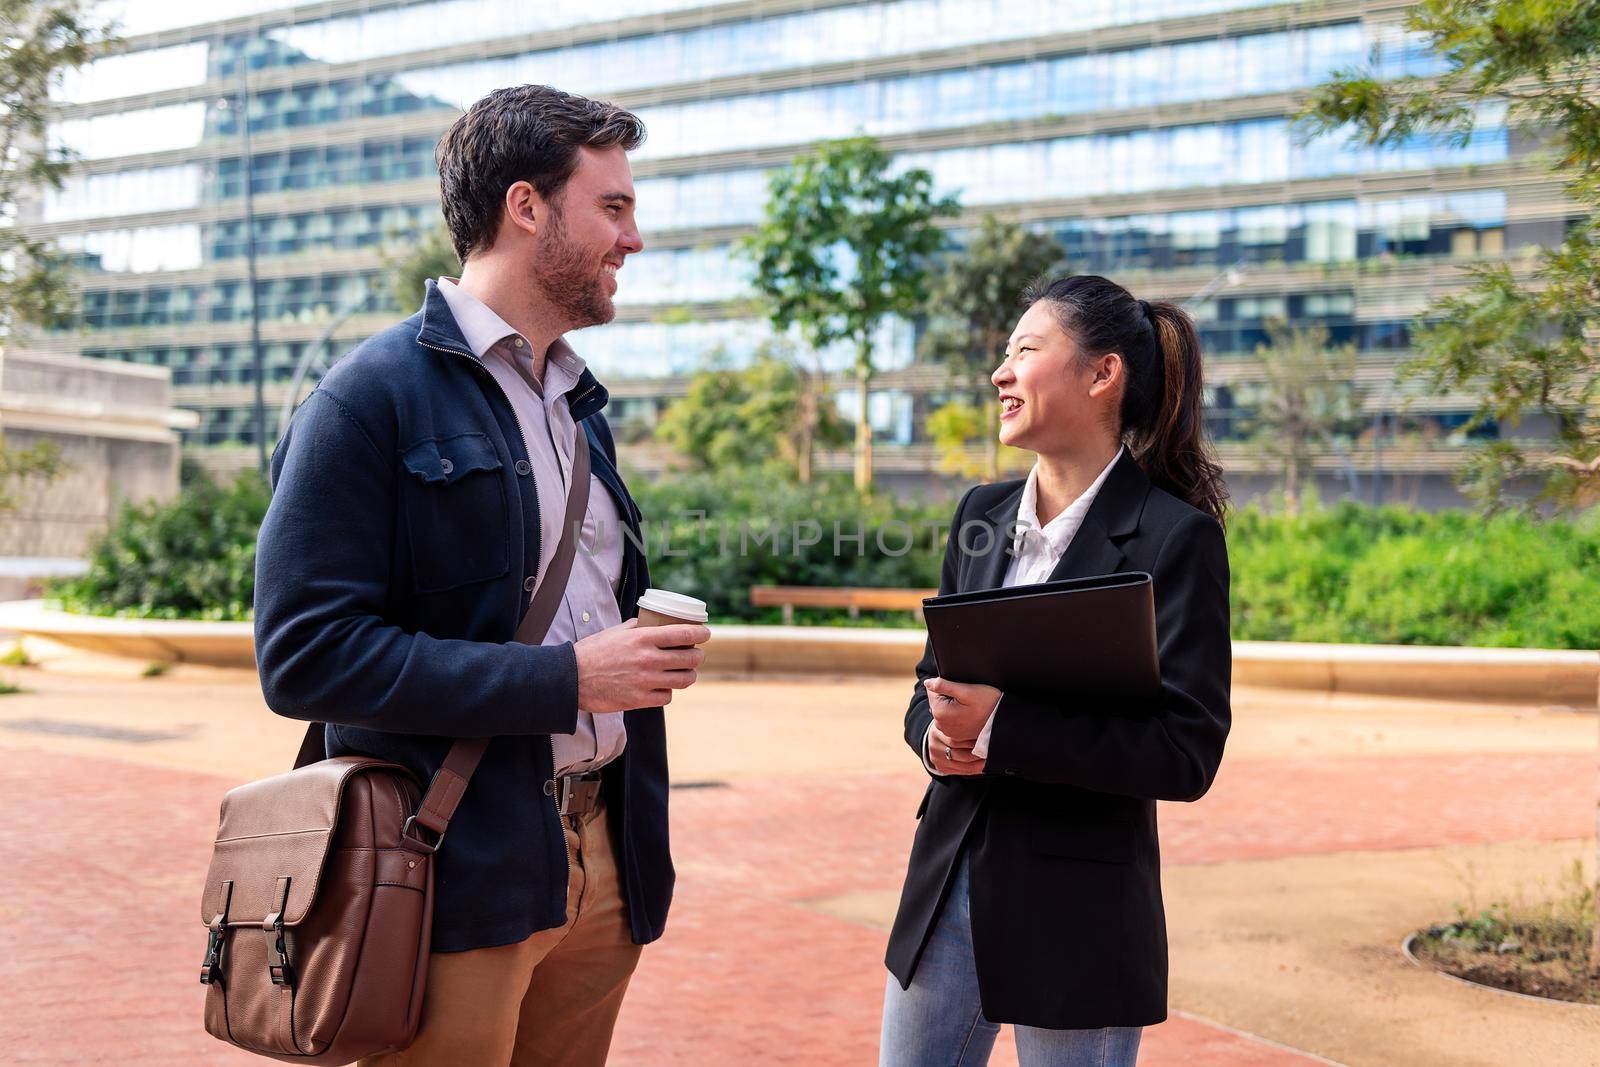 coworkers chatting happily in the park in front of the office building, concept of work and business lifestyle